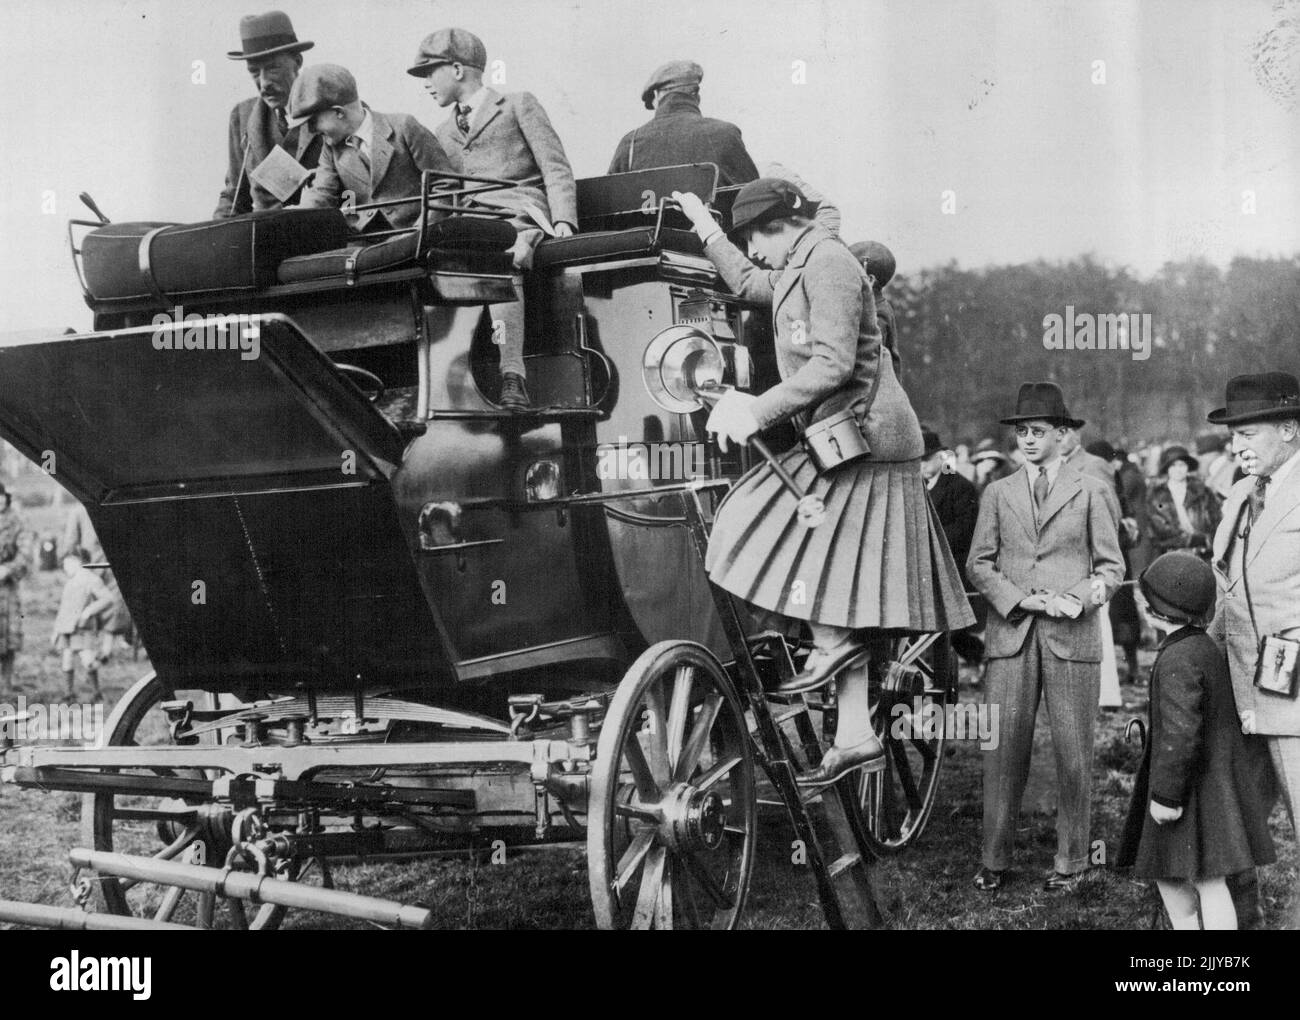 The Princess Royal at the Bramham Moor point to point meeting at Swindon Wood, near Harrogate. The Princess Royal joins her family on the Judges coach. L to R :- Lord Harewood, Lord Lascelles and the Hon. Gerald Lascelles. May 22, 1933. (Photo by Sport & General Press Agency, Limited). Stock Photo